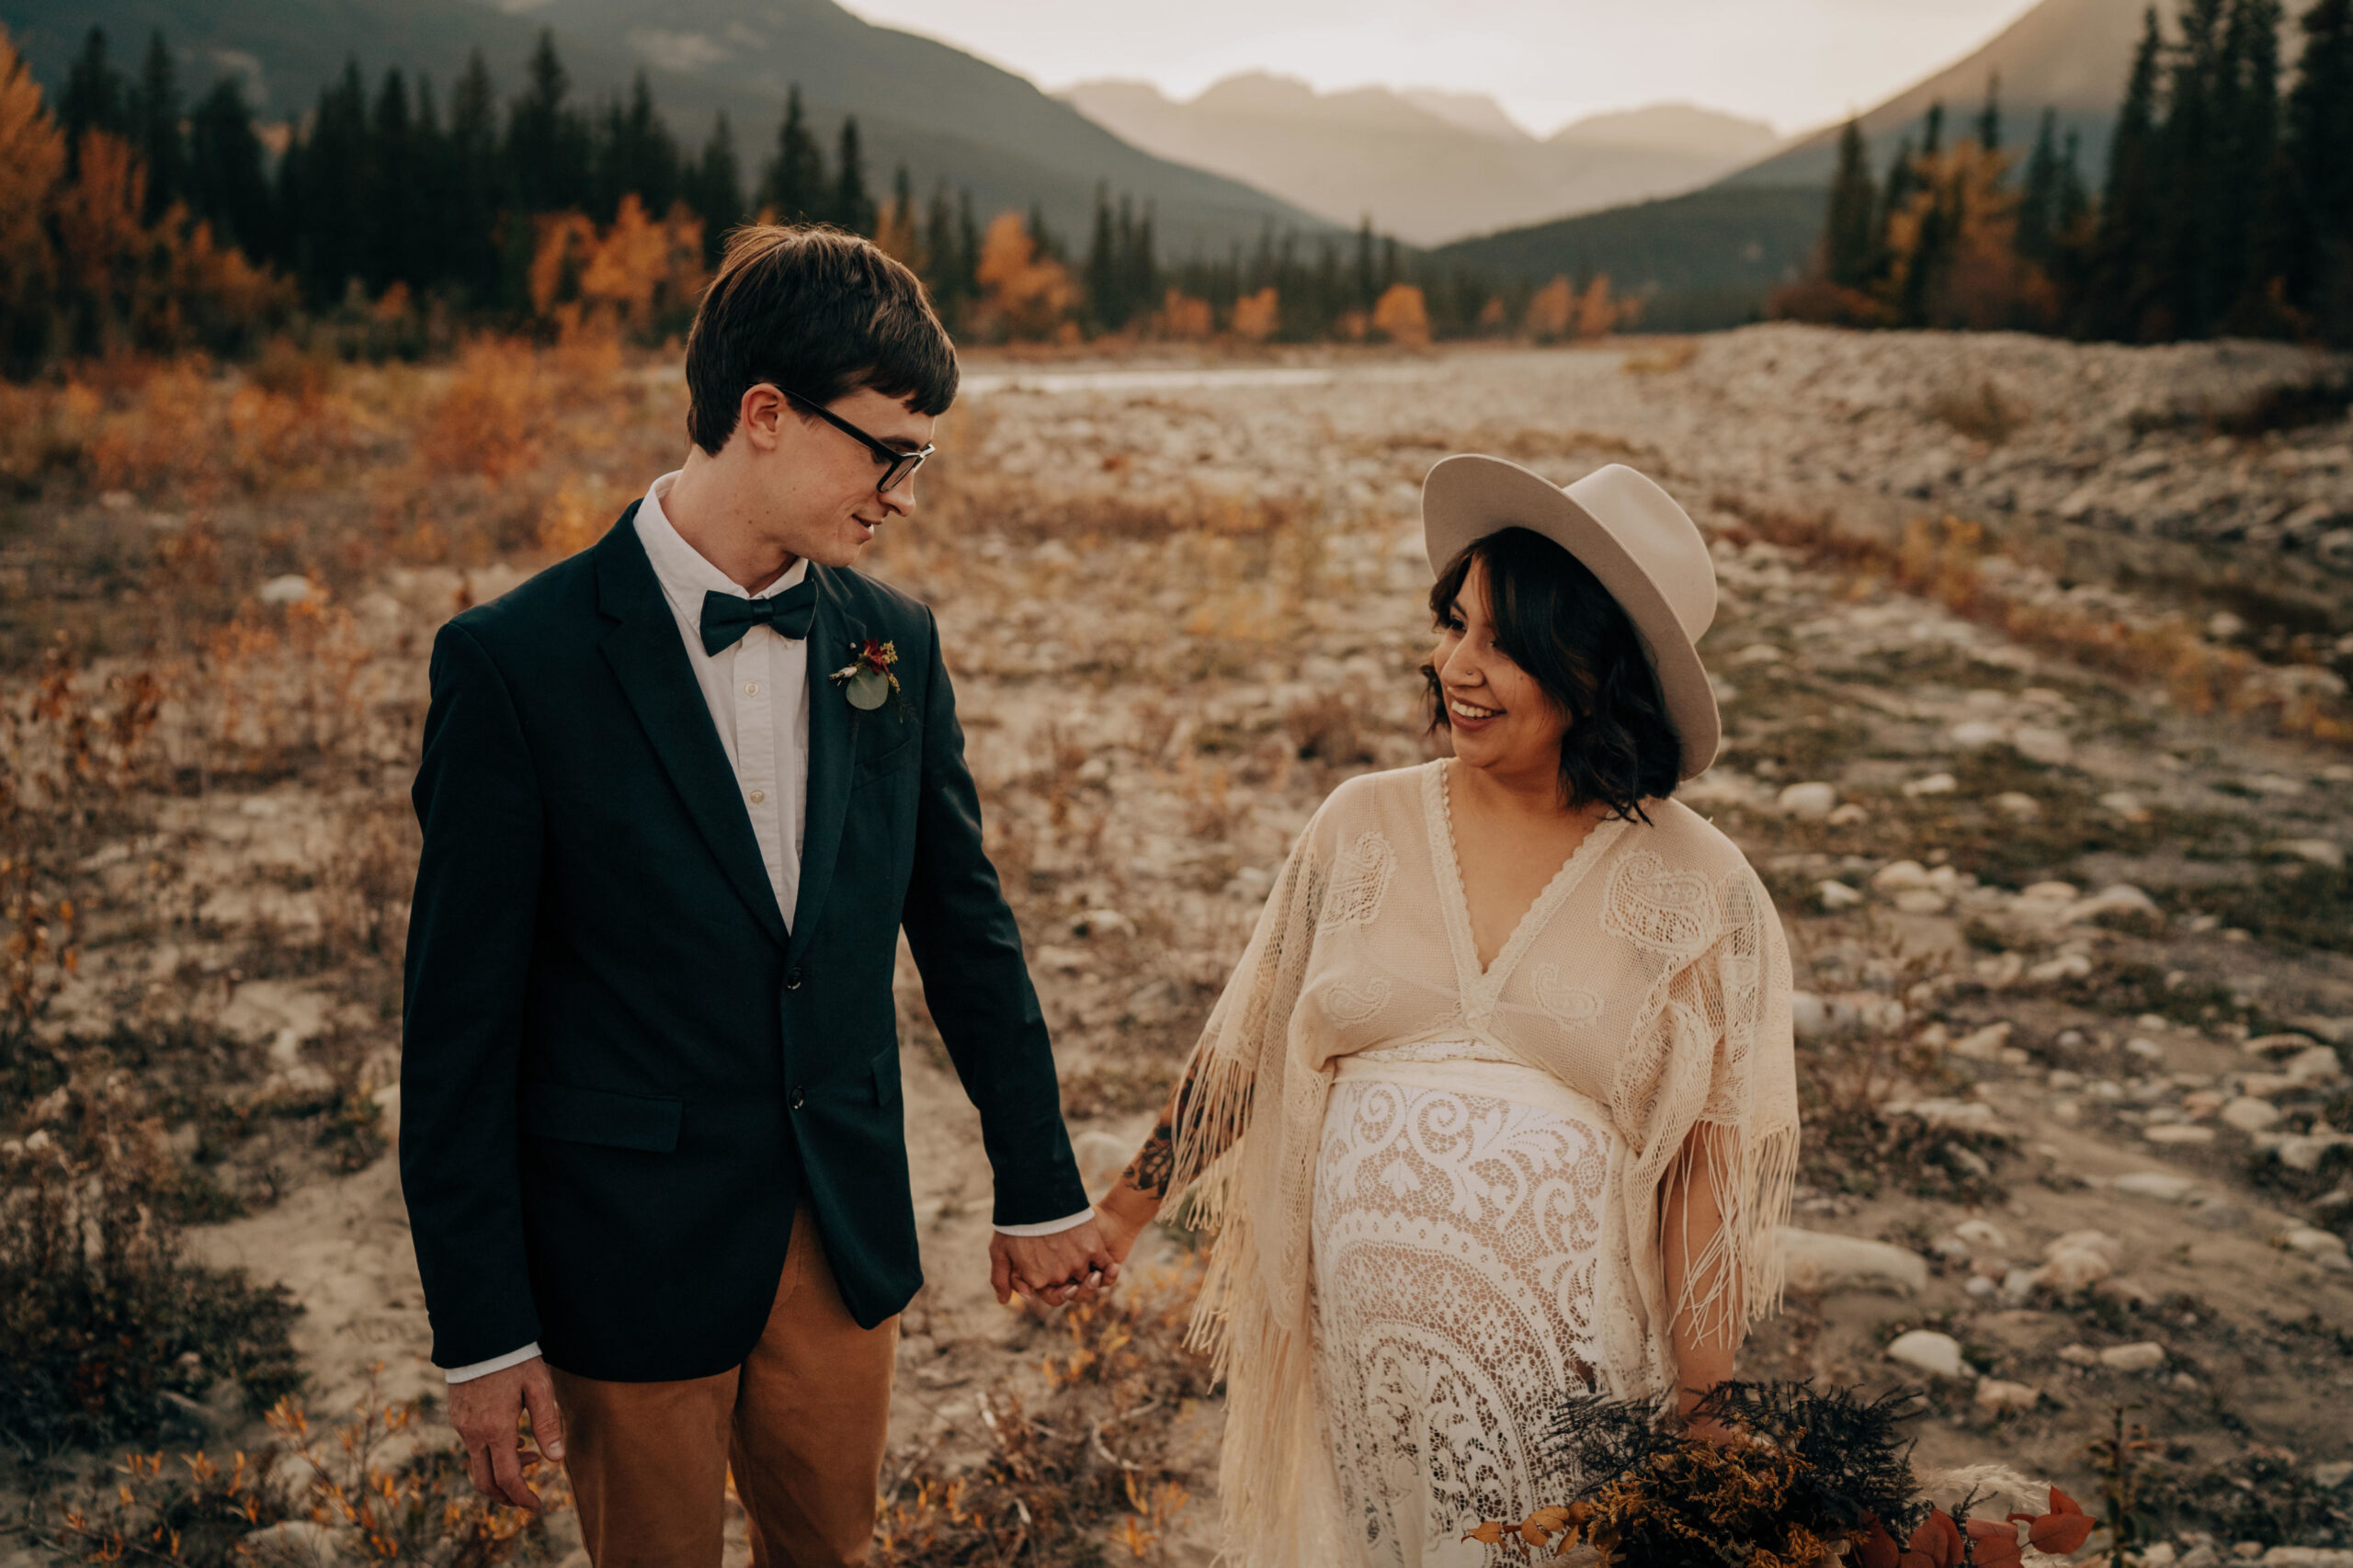 Boho bride and boho groom standing in valley, holding hands and looking at each other